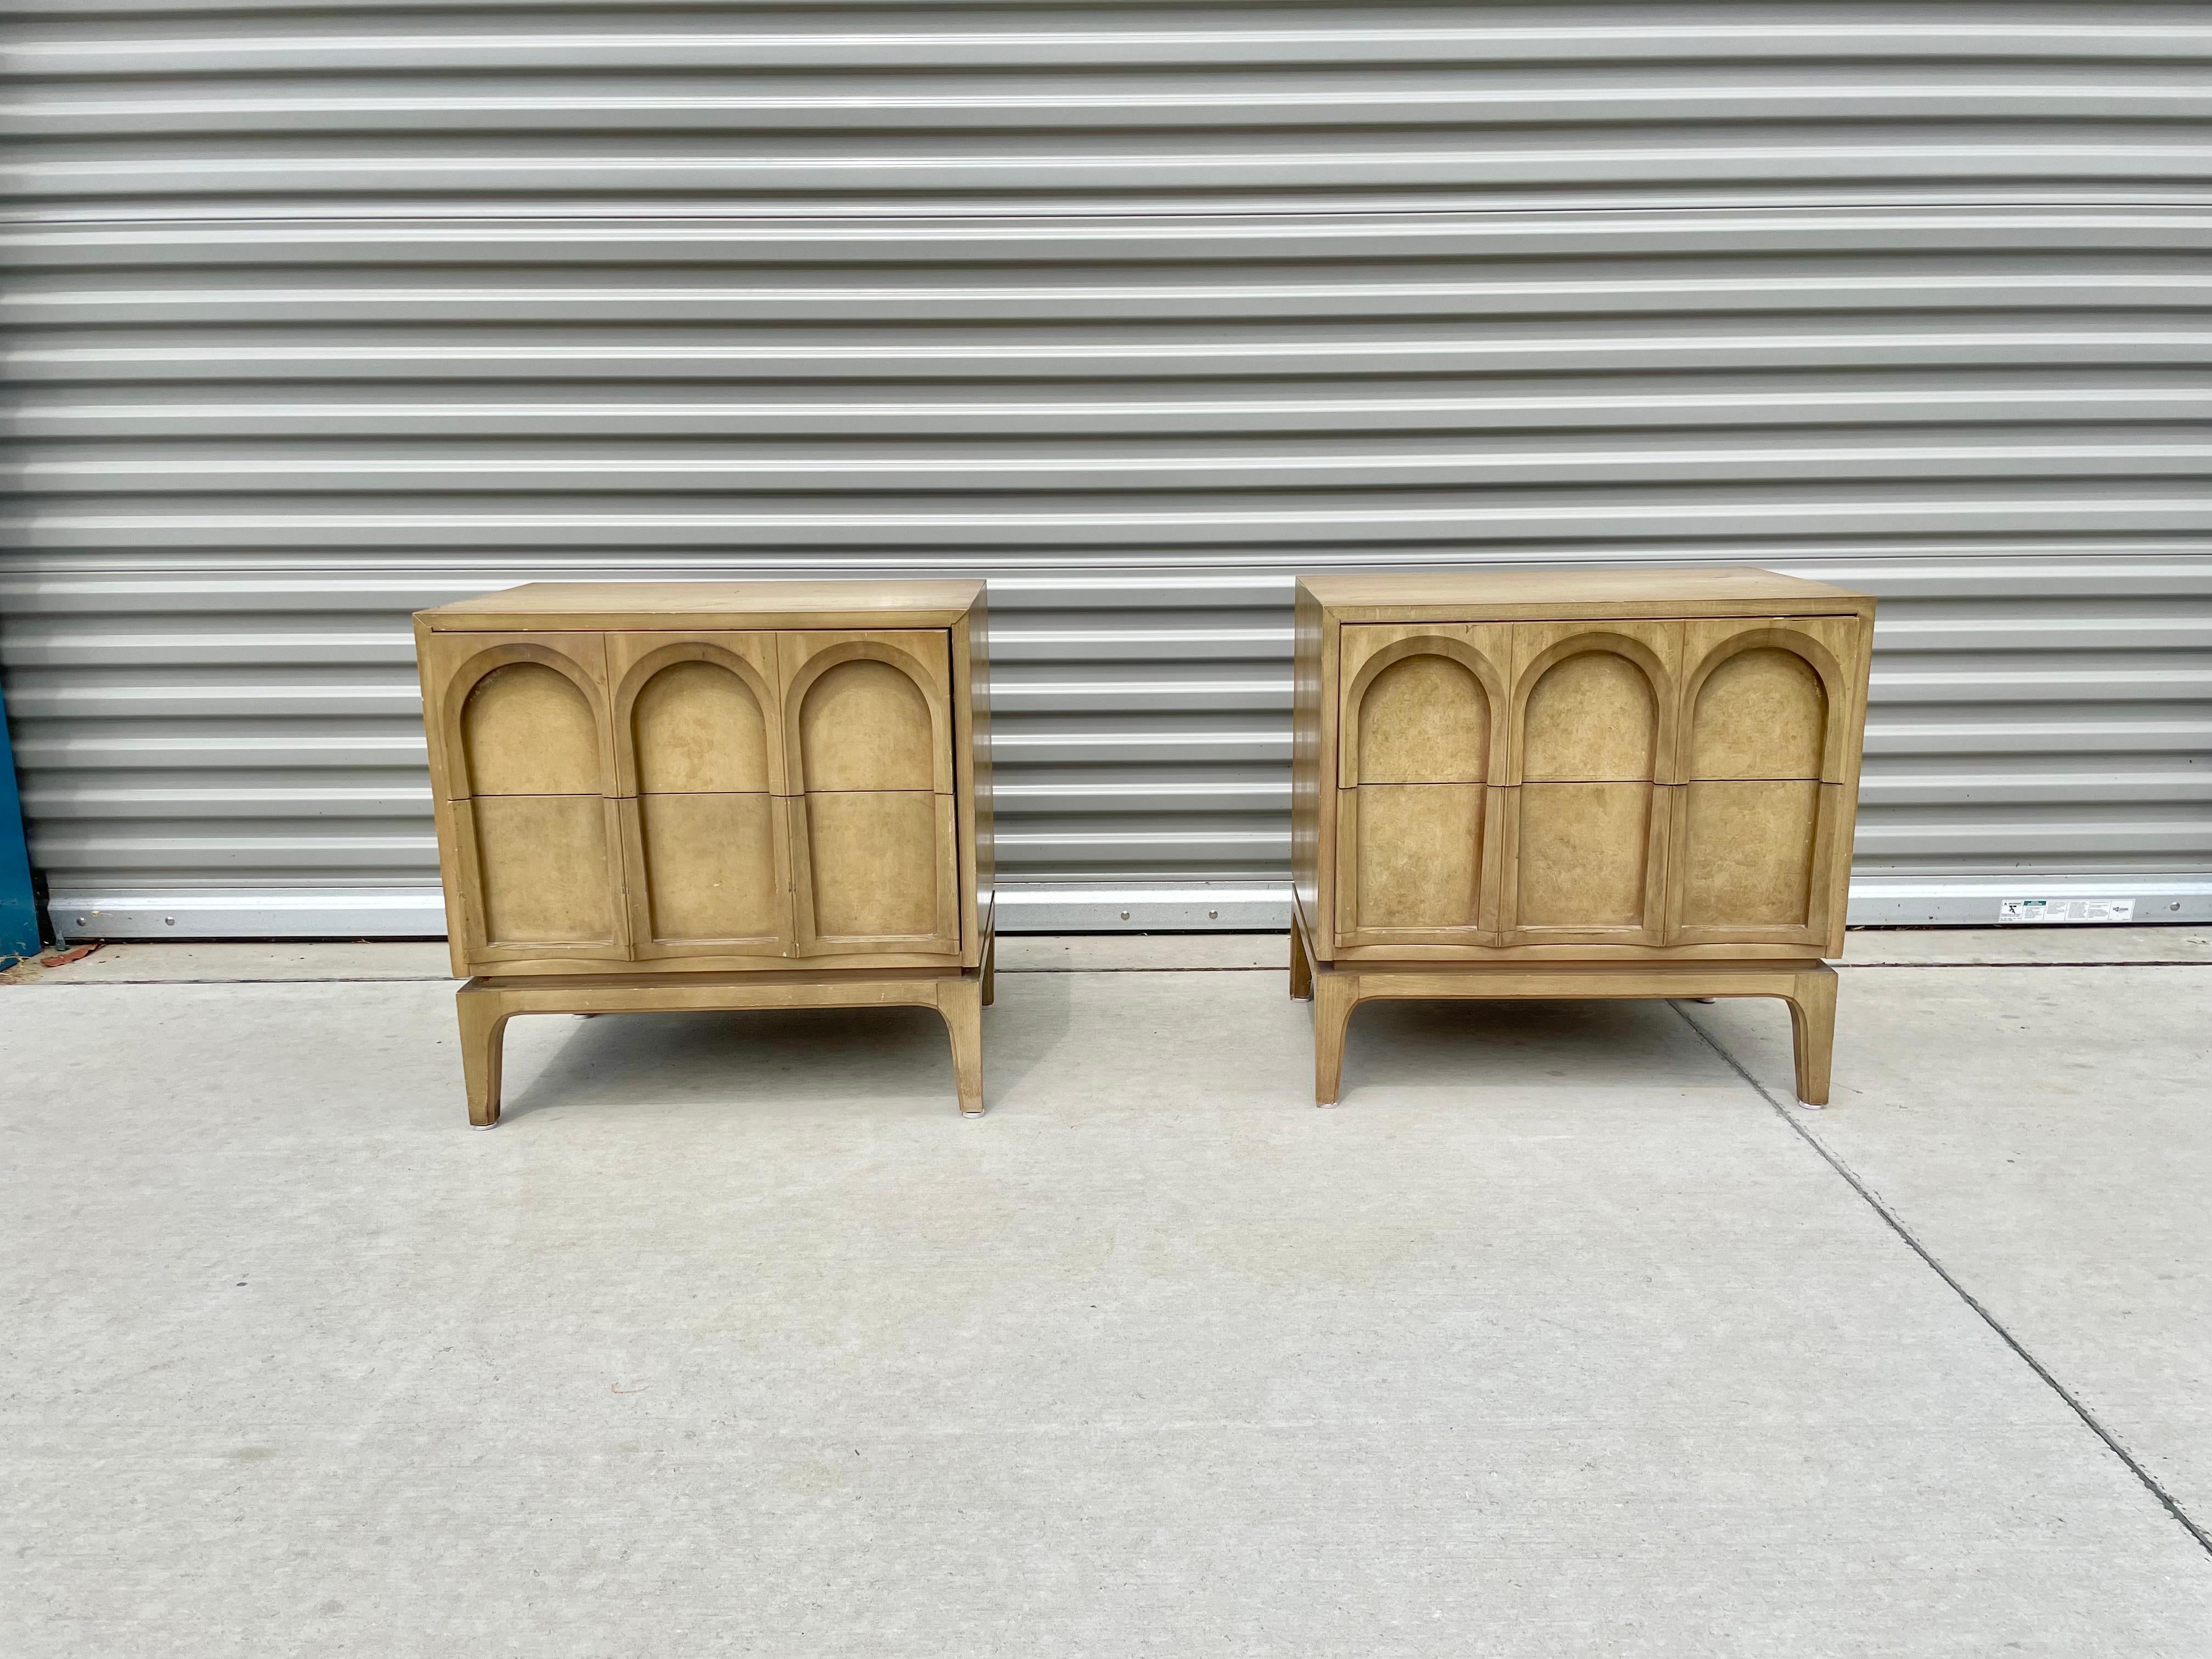 Pair of beautiful nightstands designed and manufactured by American of Thomasville in the United States, circa 1950s. Each nightstand features two pull-out drawers with Gorgeous carved arches on the front, giving them a unique style. Marked with